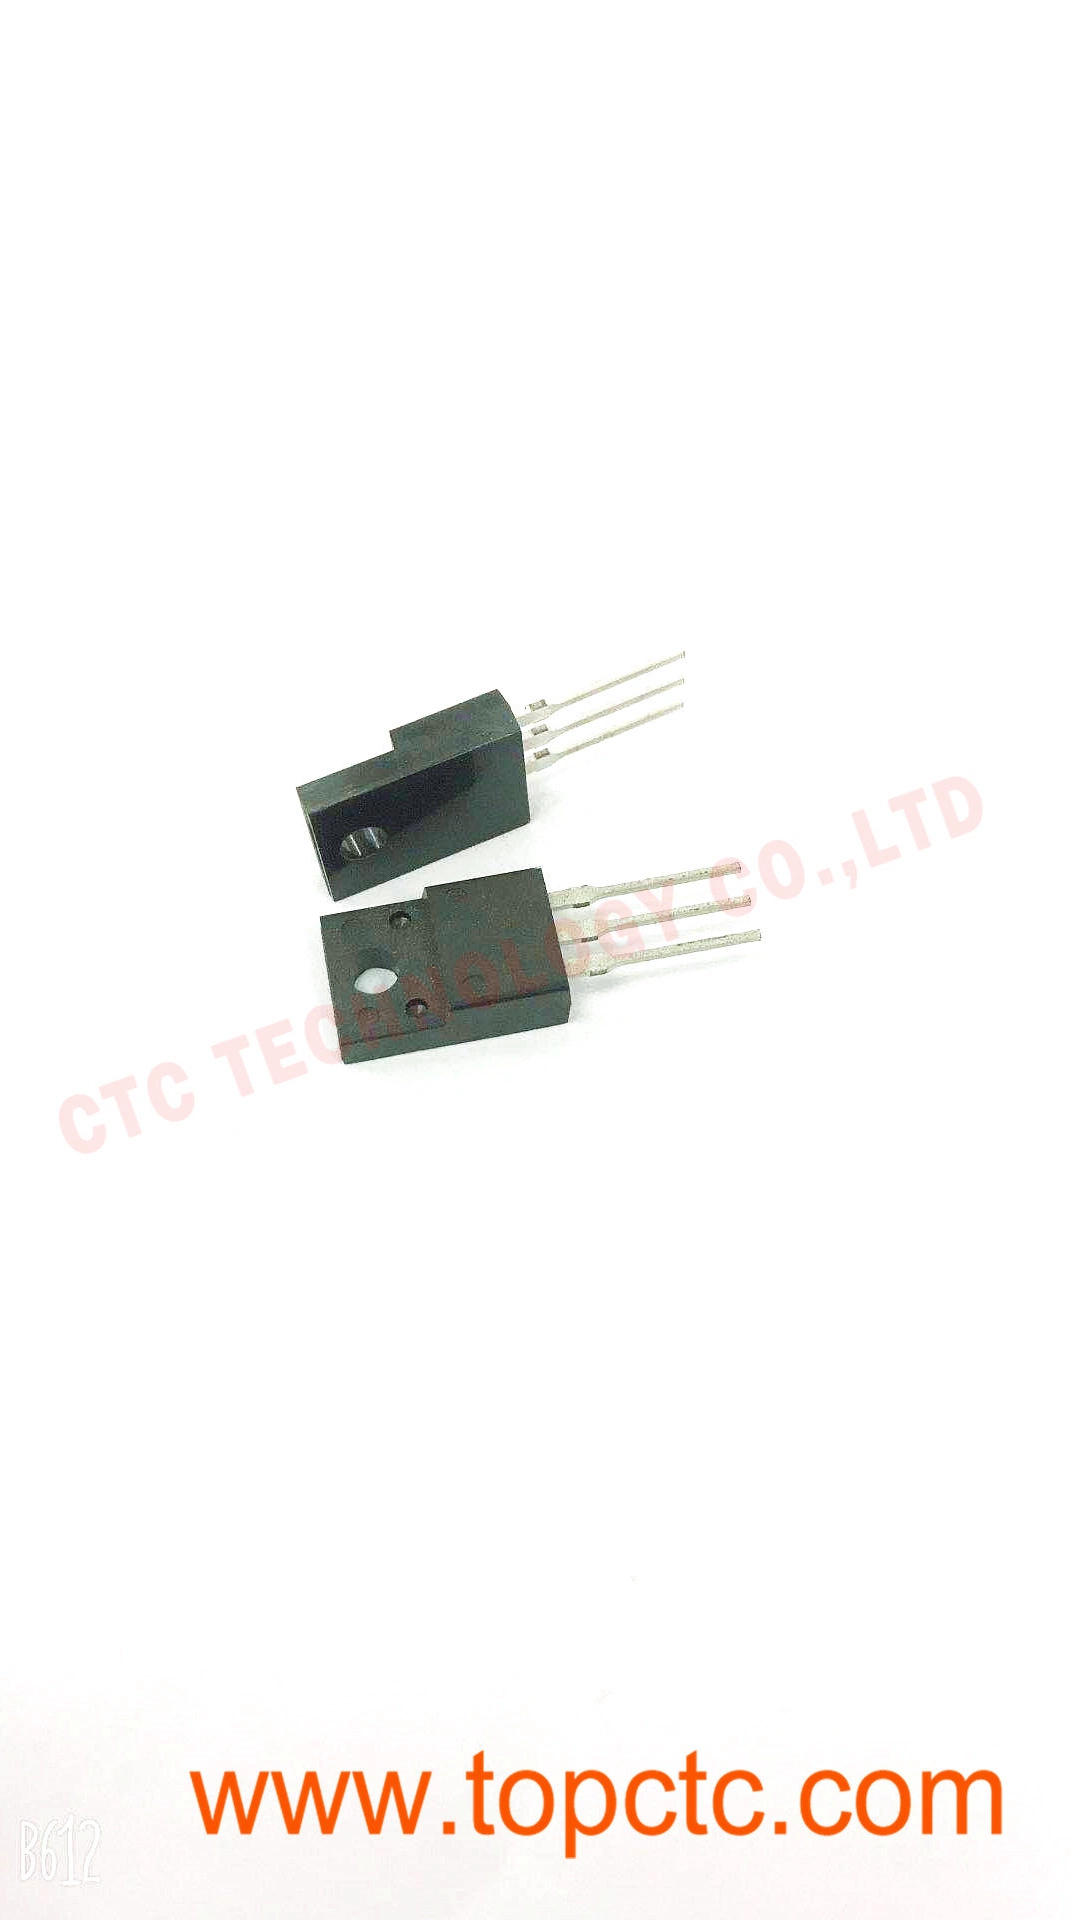 Enhancement Mode N und P-Channel Power NCE4688 MOSFET Integrated Circuit